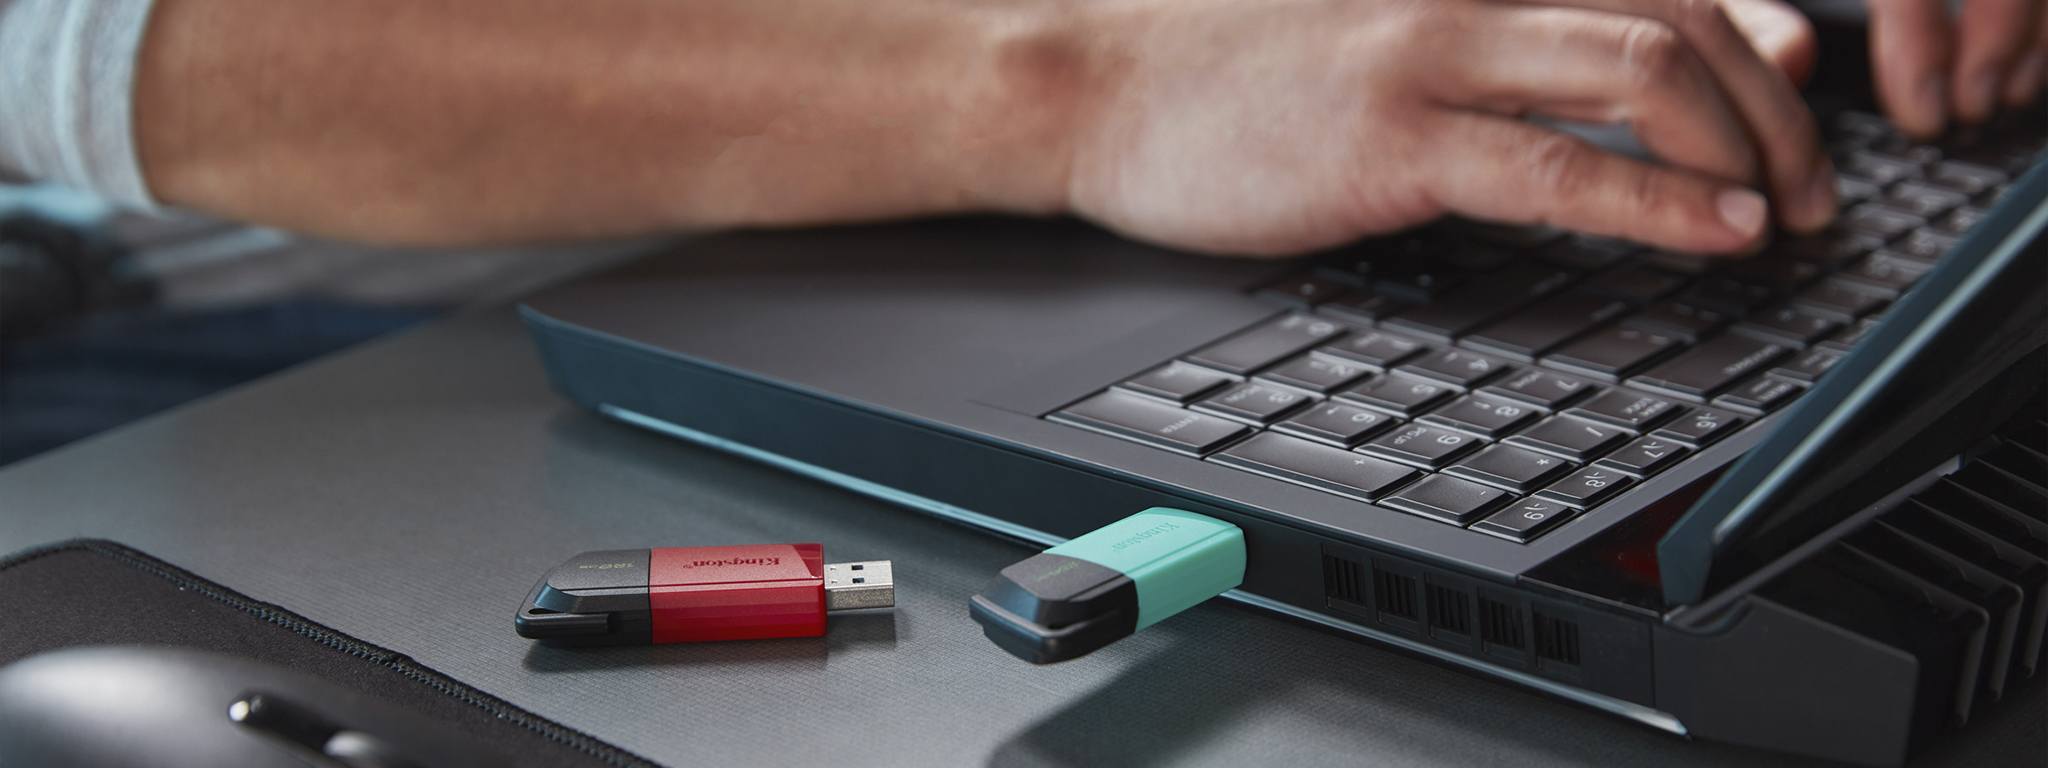 2 DataTraveler Exodia M USB drives, one with a green cap and one with a red cap, on a desk with a person on a laptop in the background